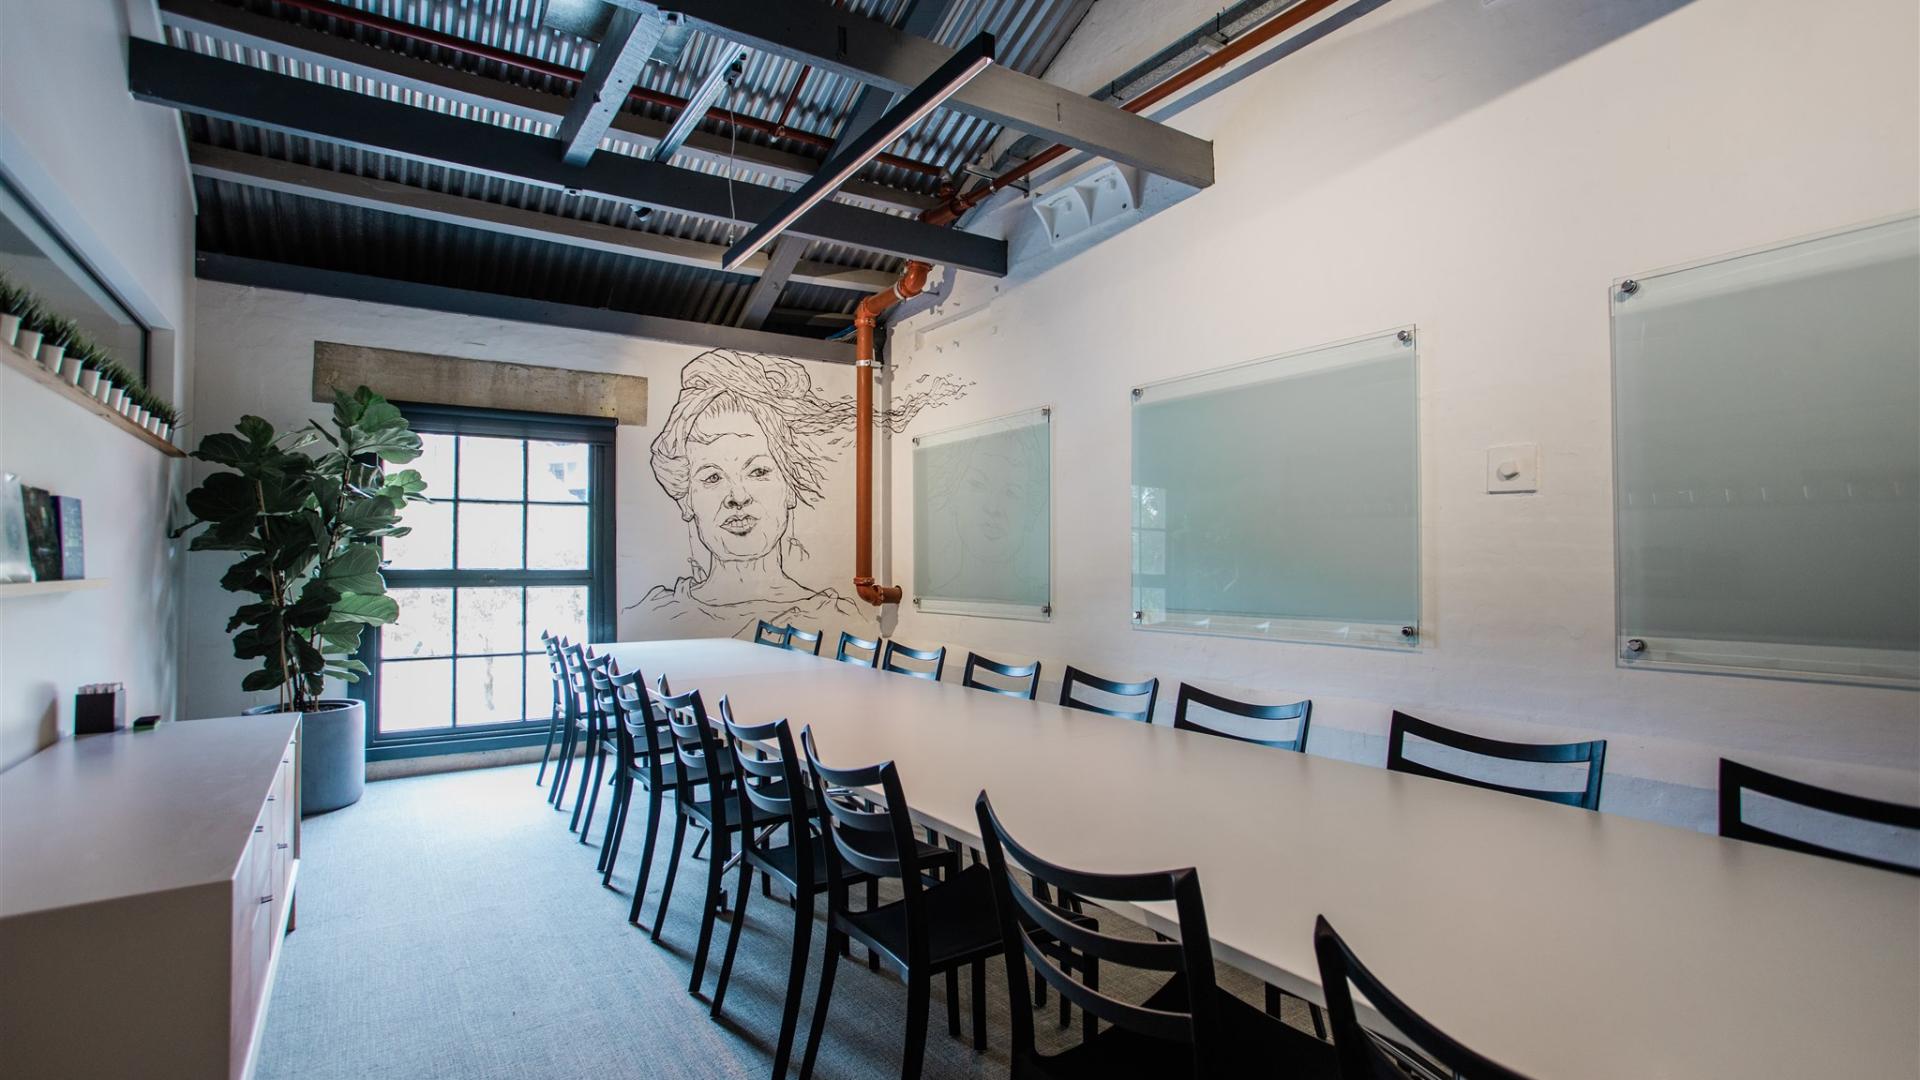 Meeting Rooms for Hire in Darling Harbour